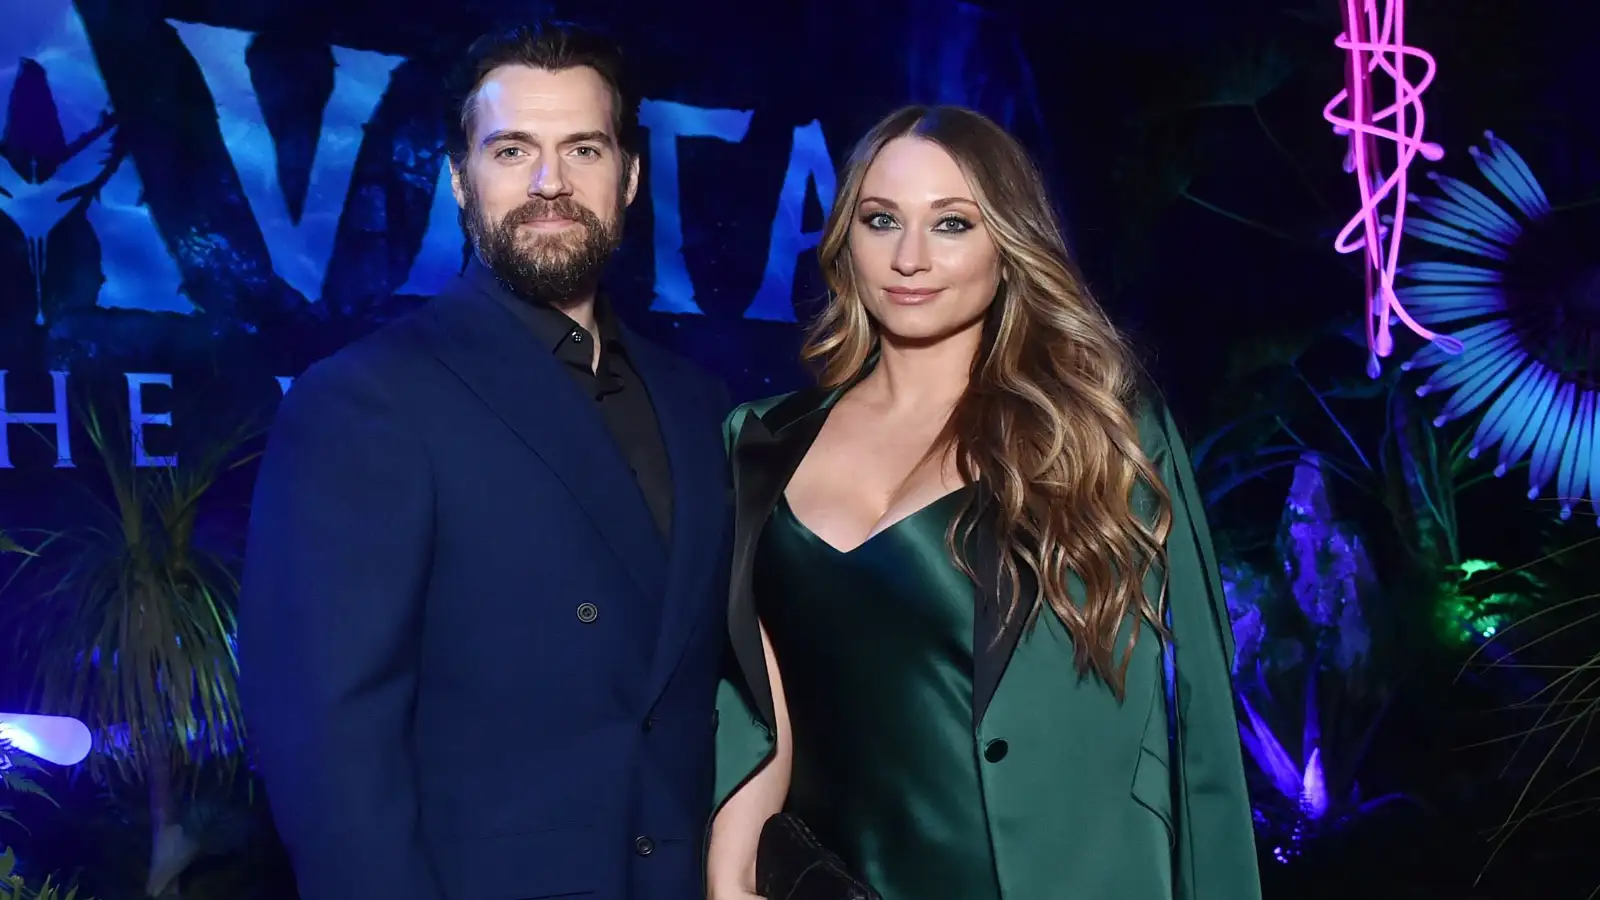 The Witcher star Henry Cavill's mystery girlfriend revealed as movie exec  Natalie Viscuso